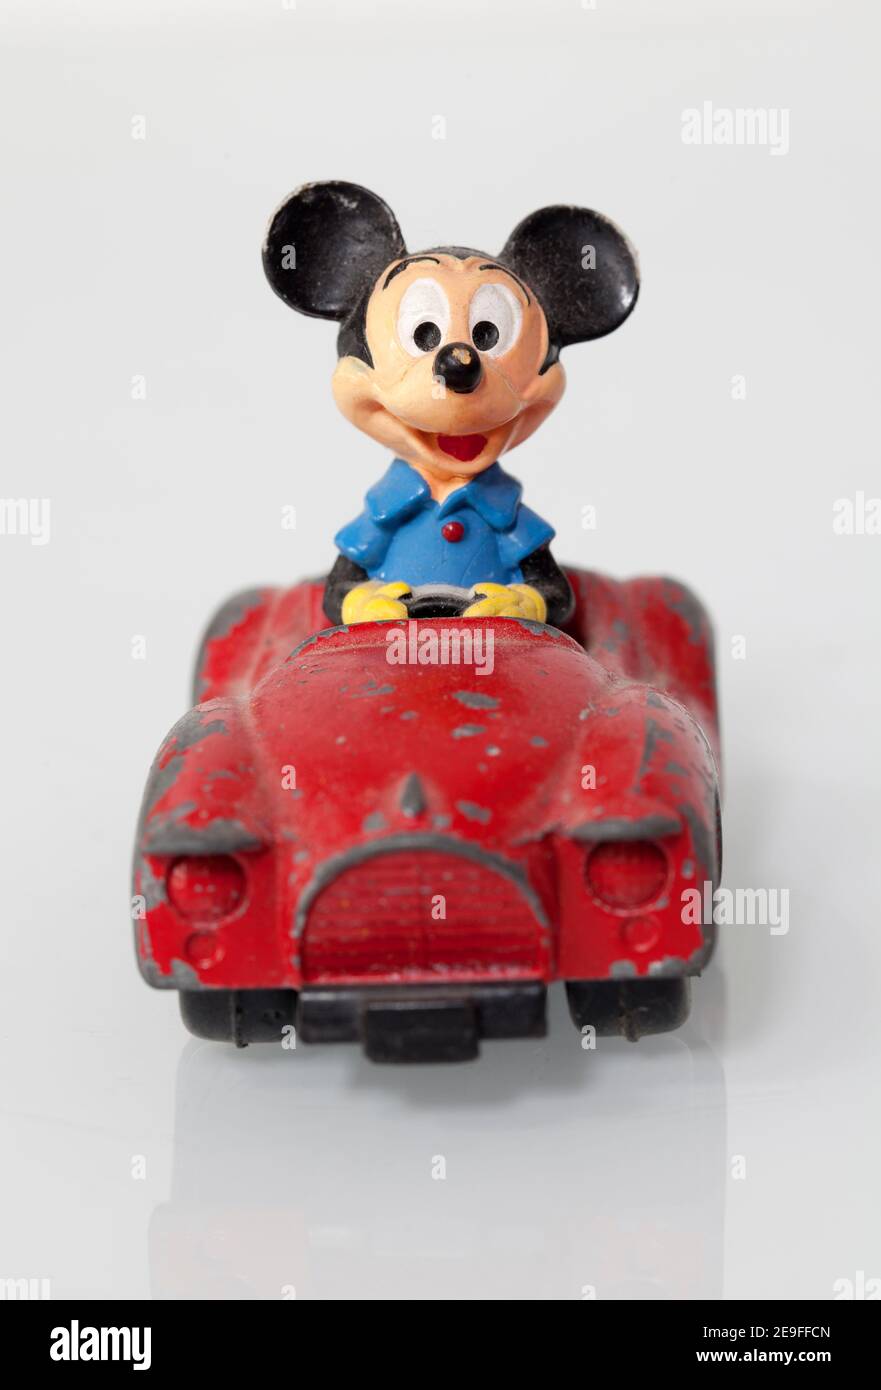 Vintage Diecast Toy Model MICKEY MOUSE in Car Stock Photo